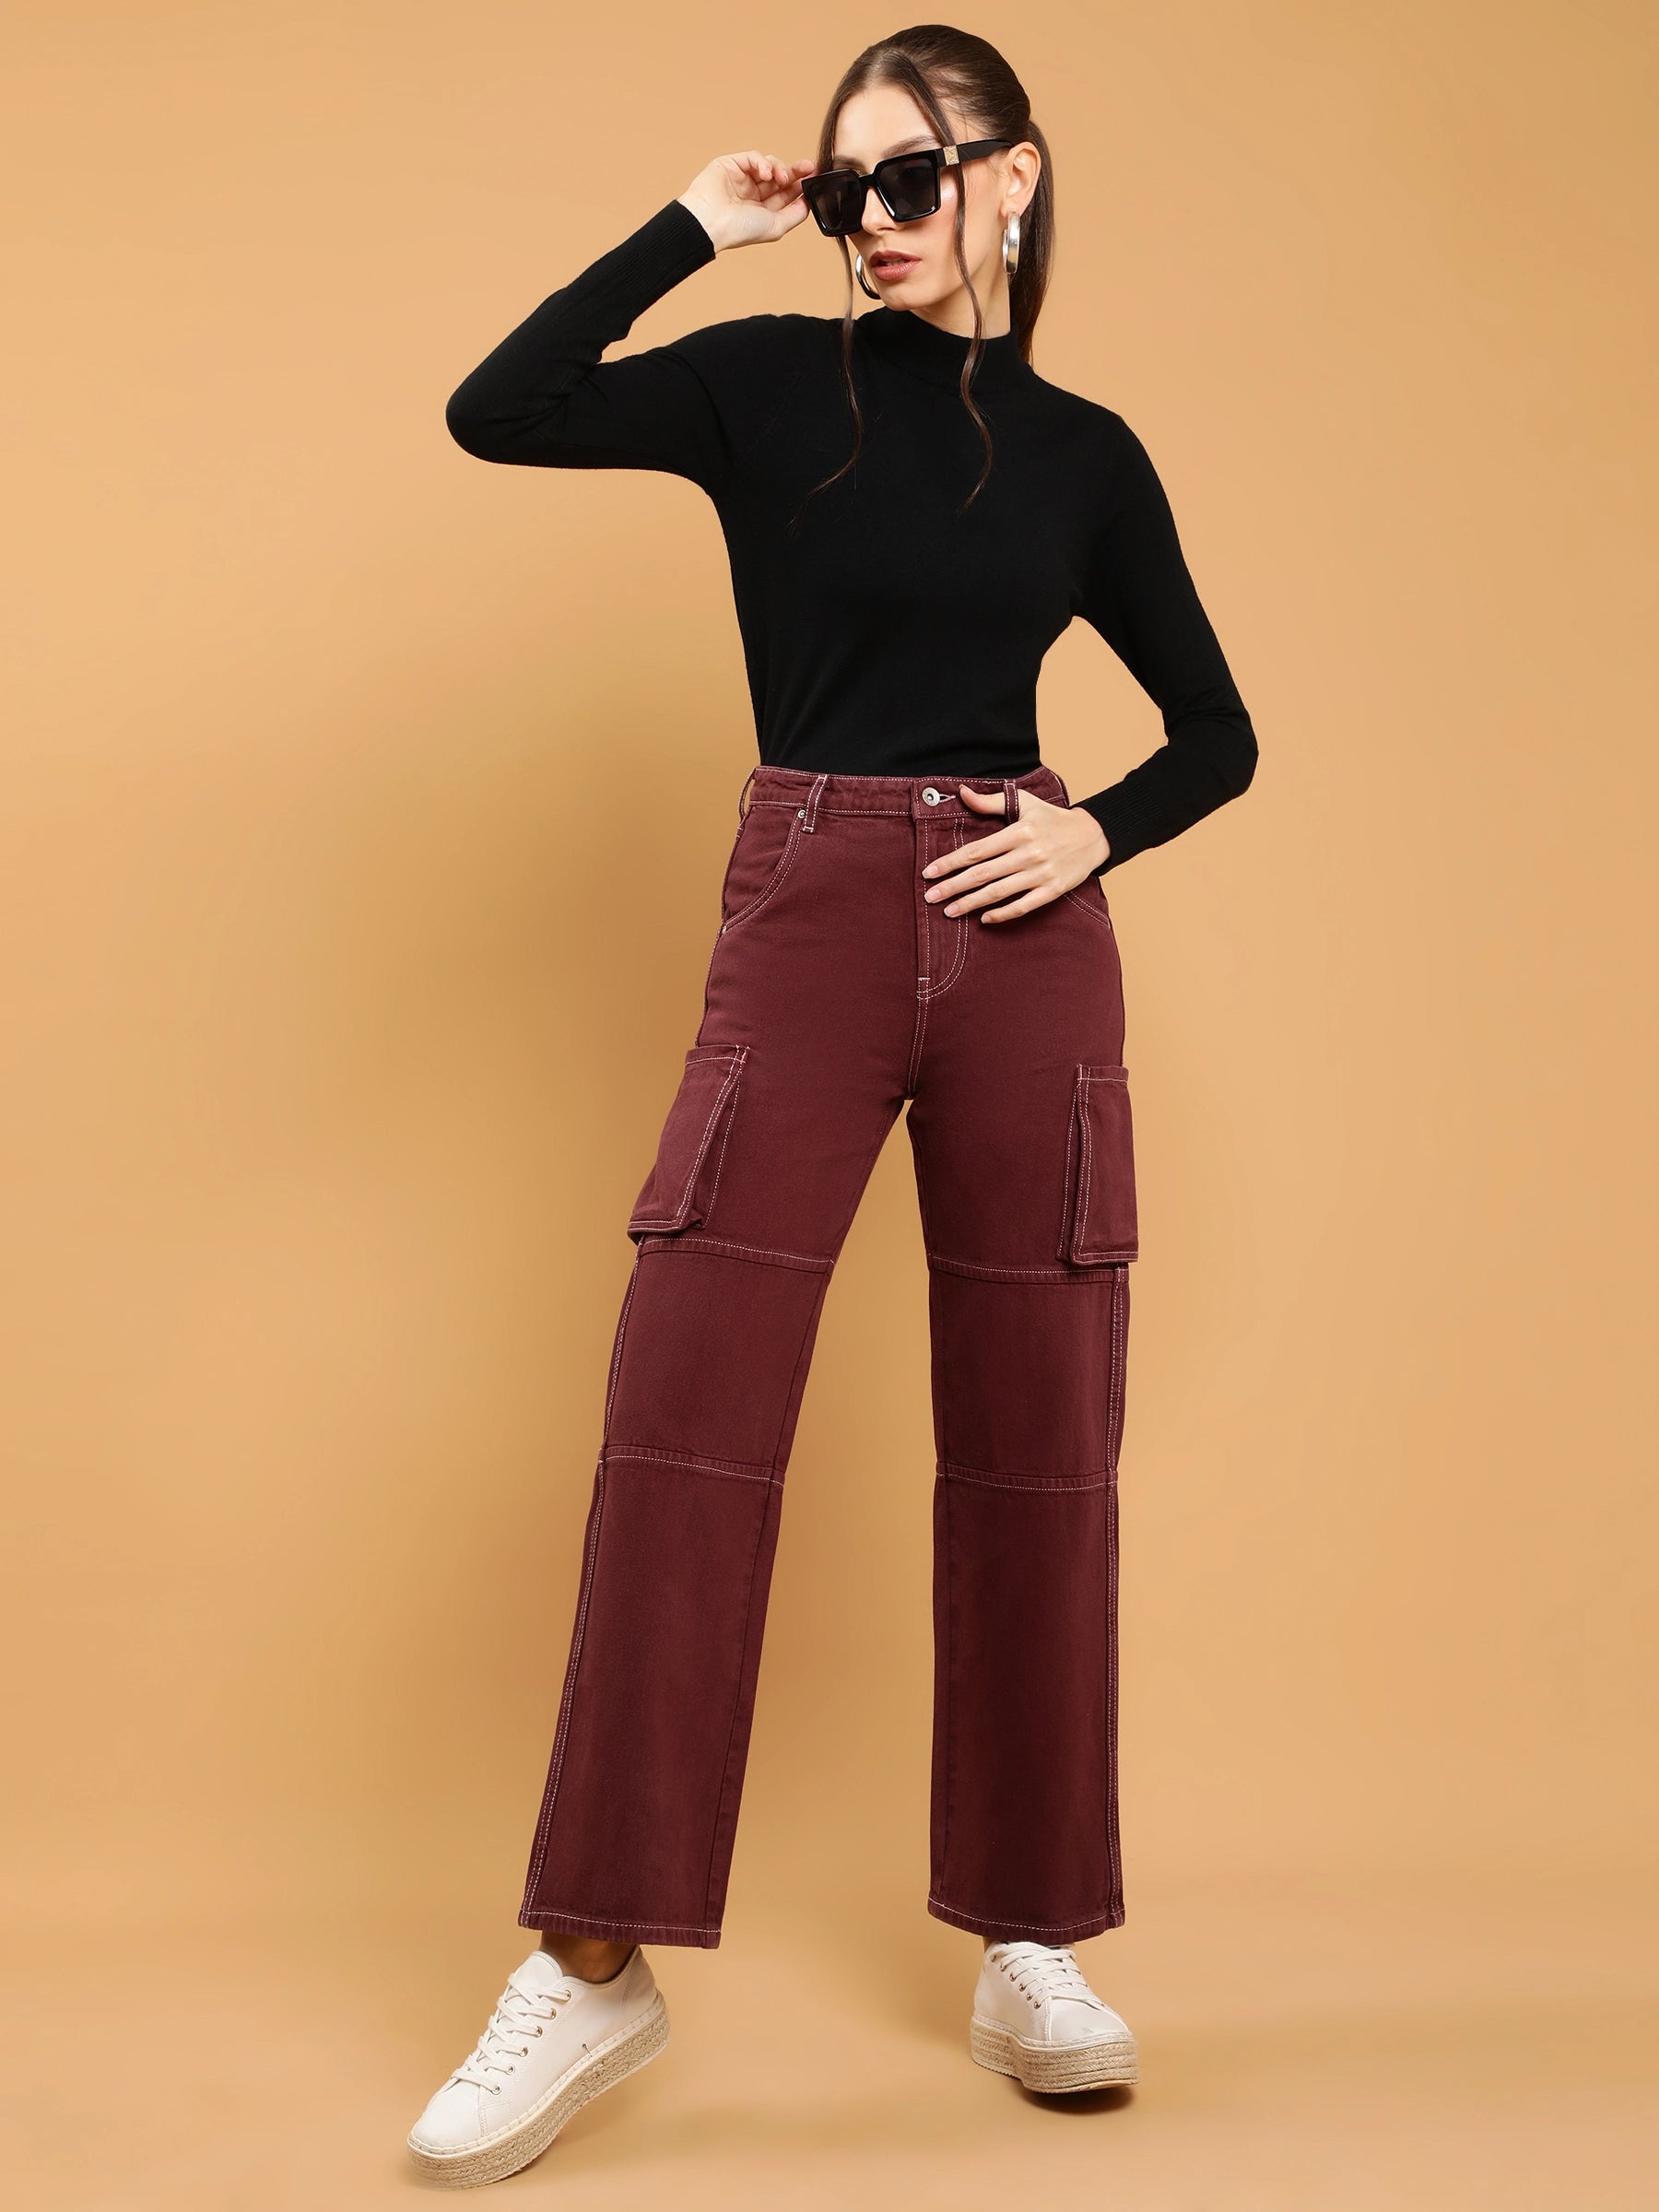 High Waisted Jeans for Women Cargo Pants Straight Solid Color